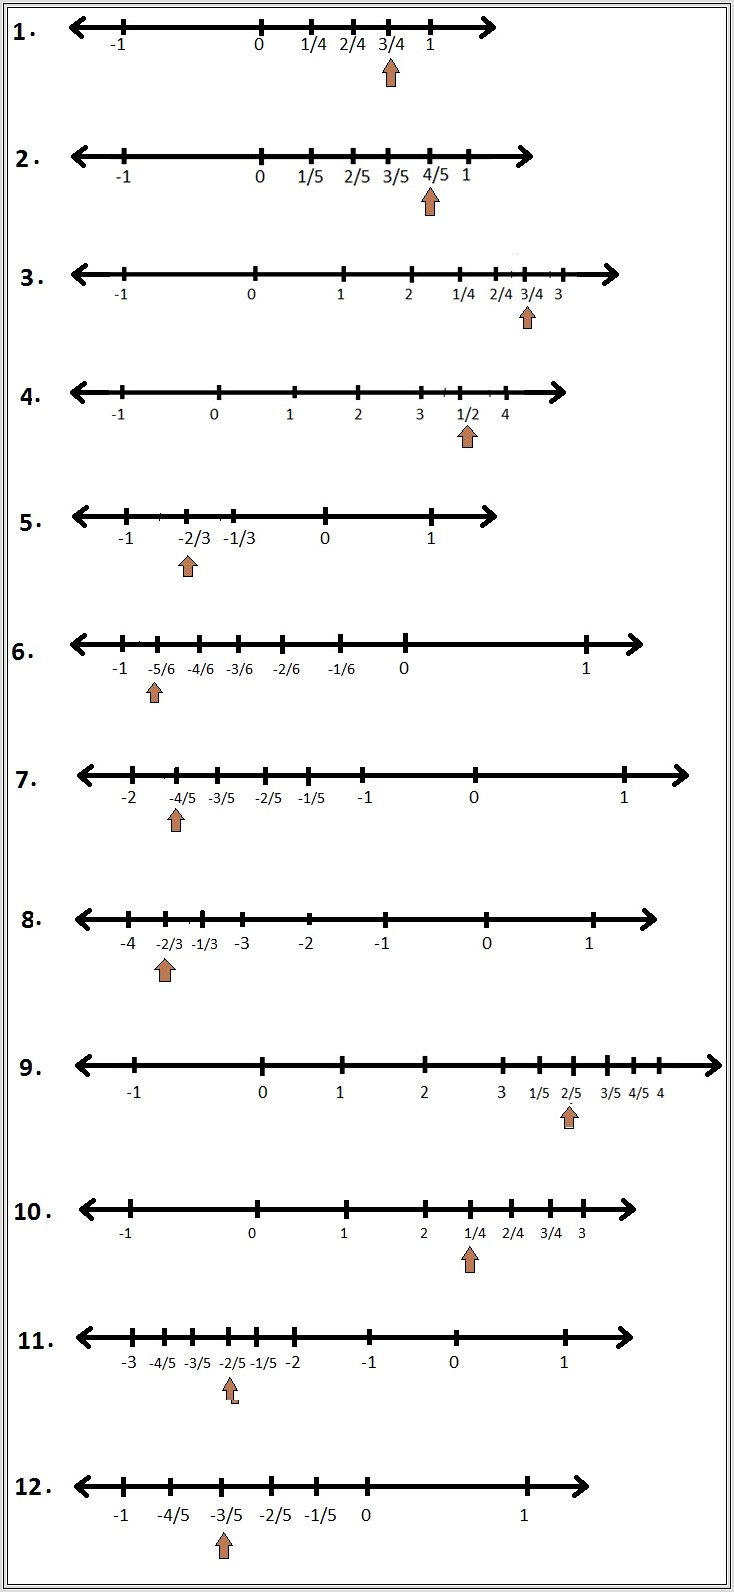 Comparison Of Rational Numbers Worksheet